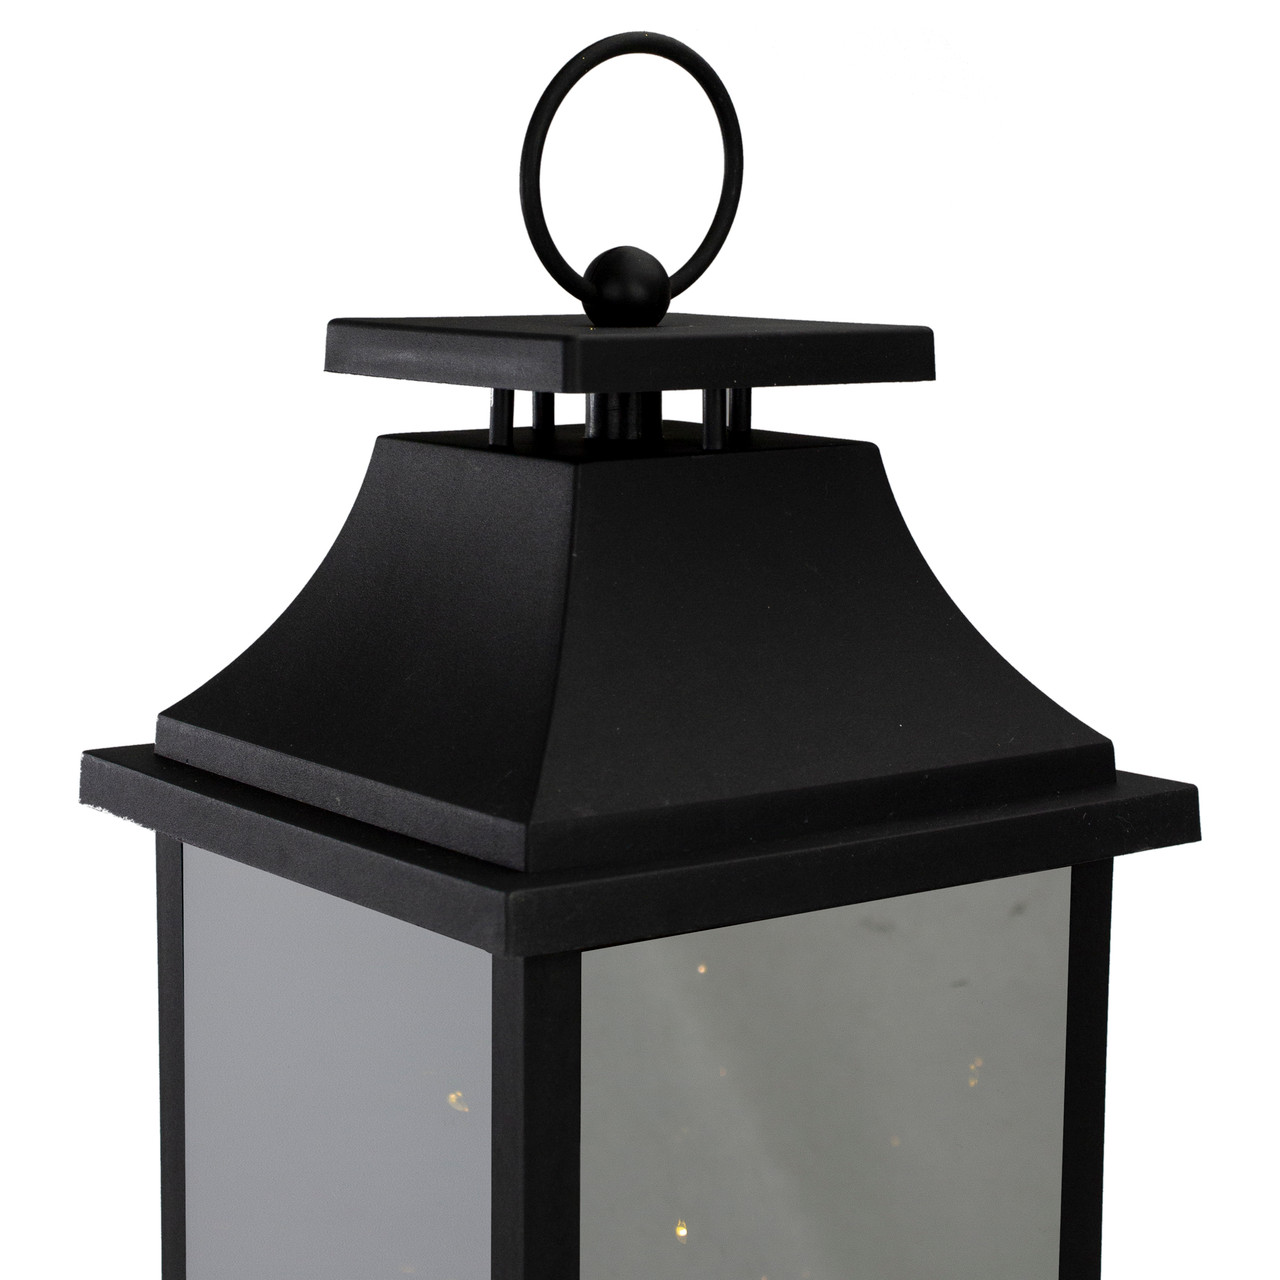 Northlight 12 Black LED Lighted Battery Operated Lantern Warm